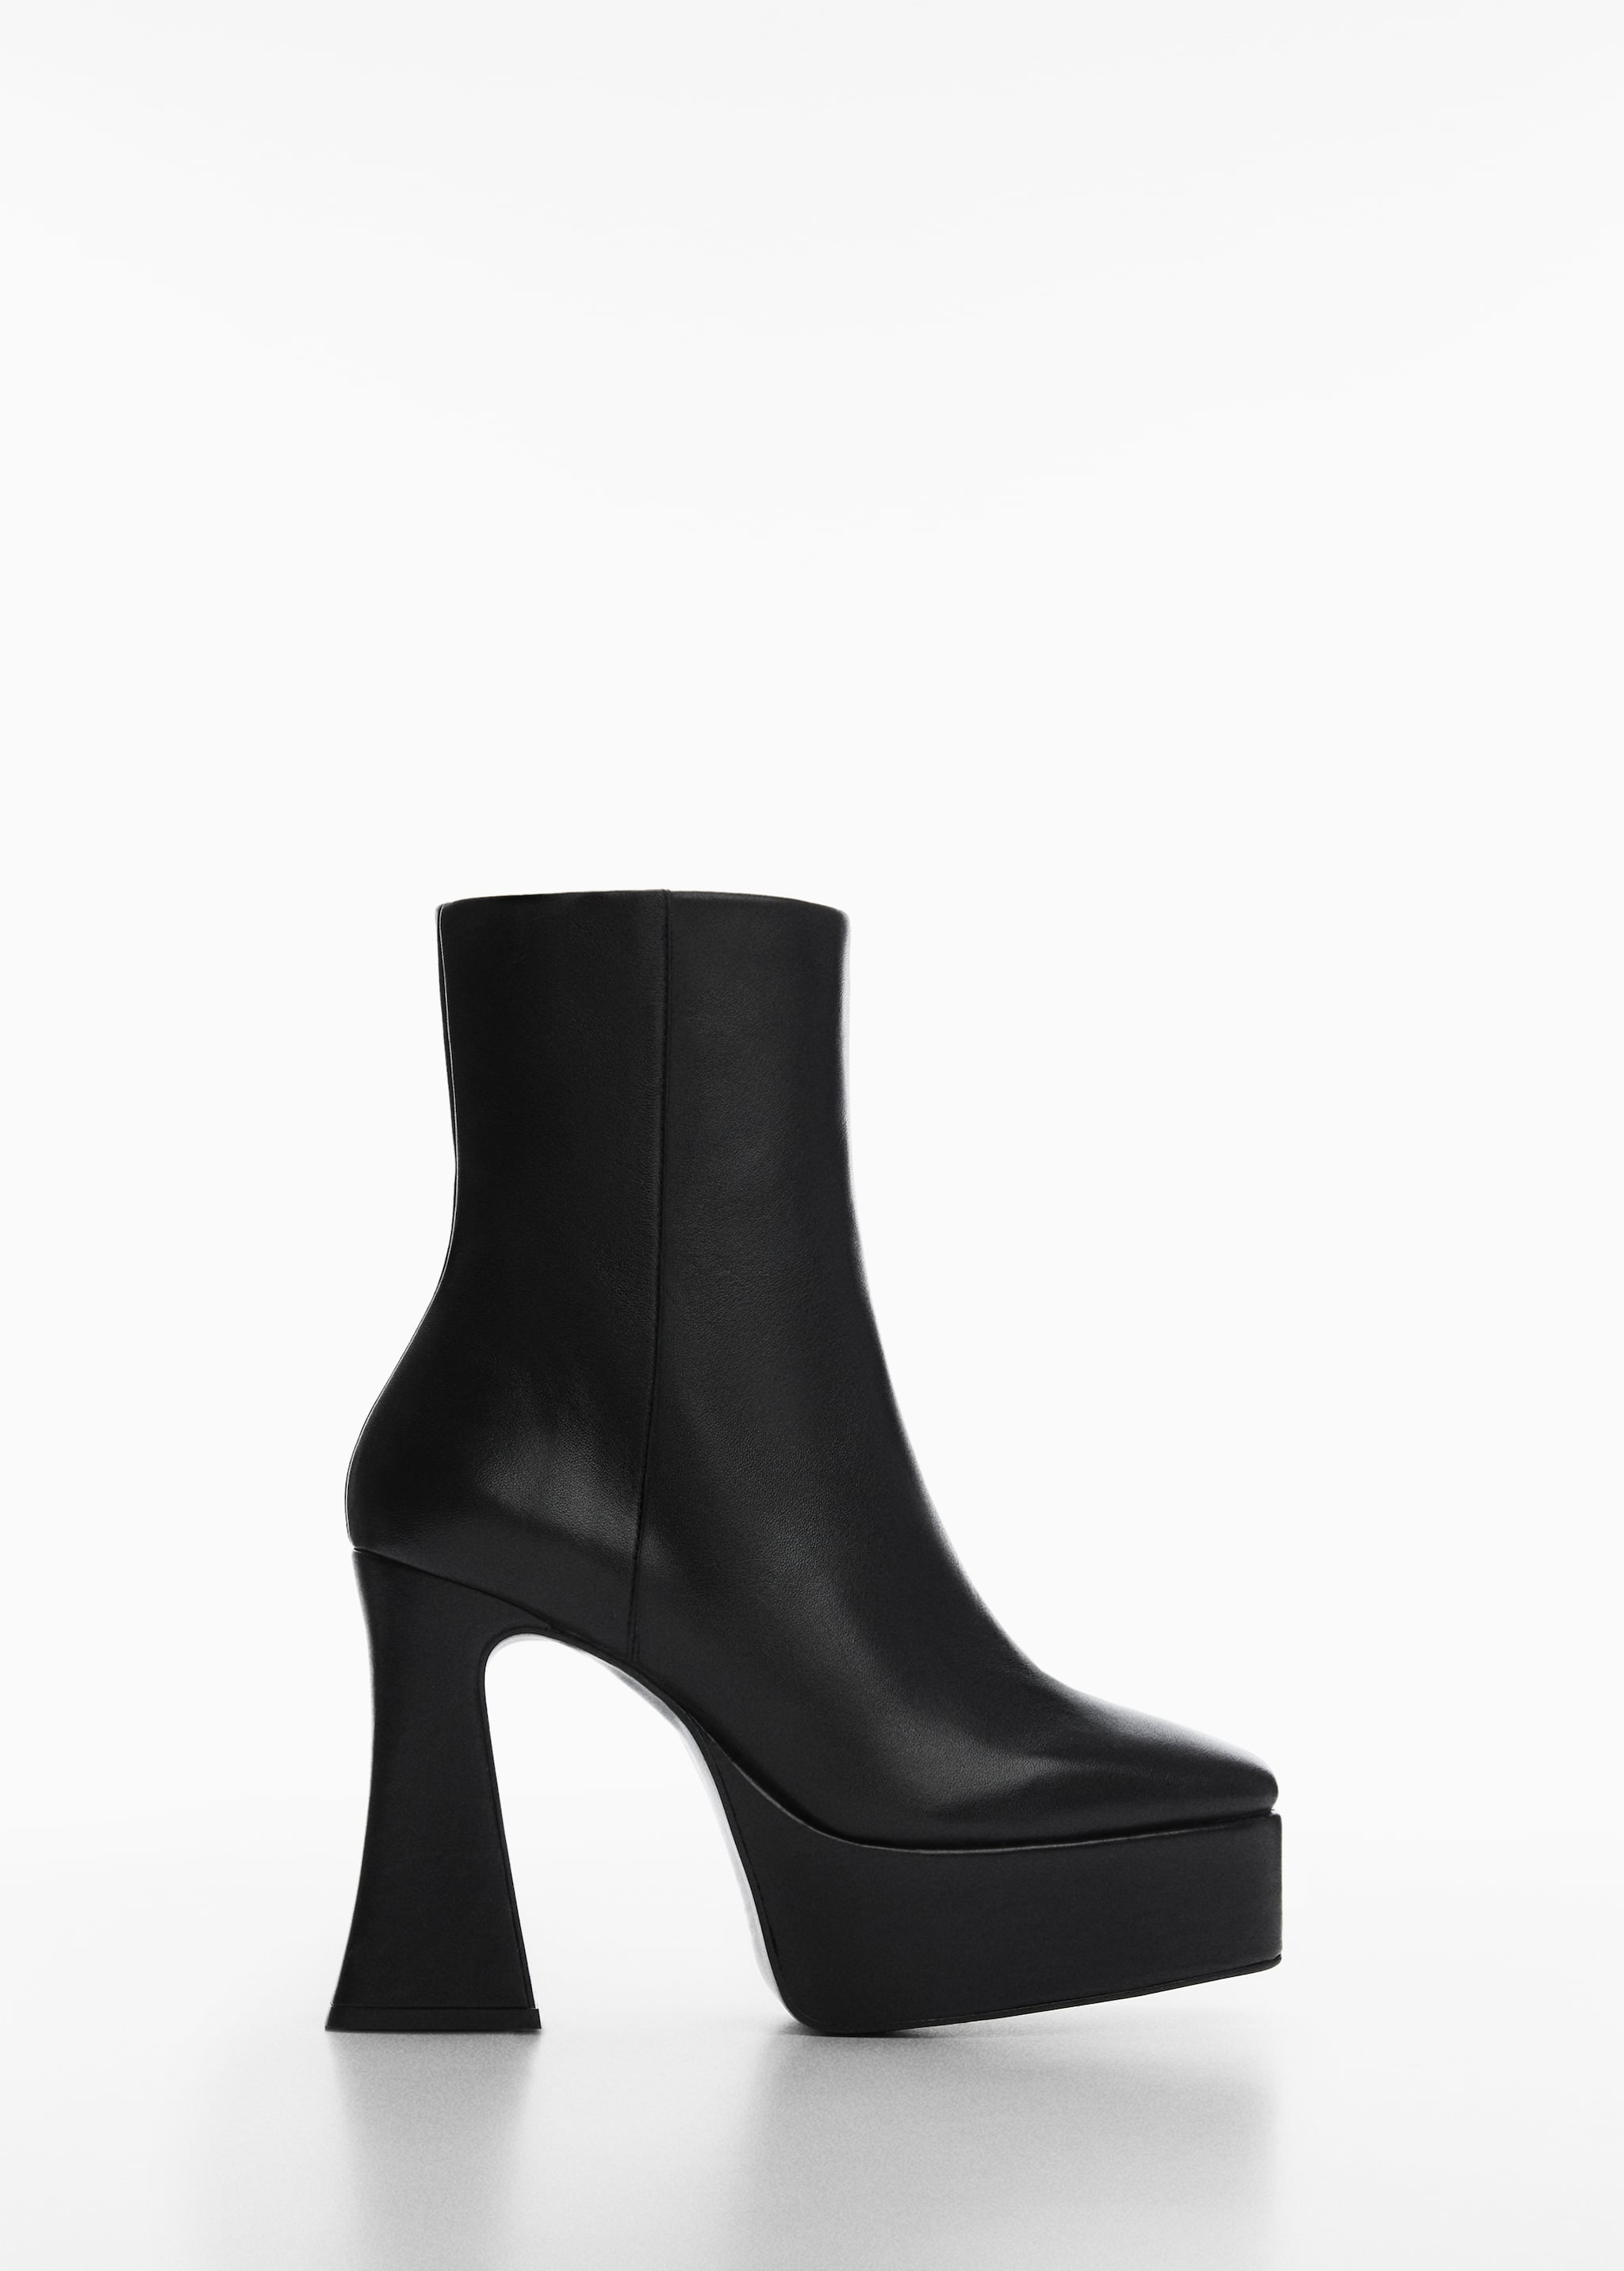 Platform leather ankle boots - Article without model